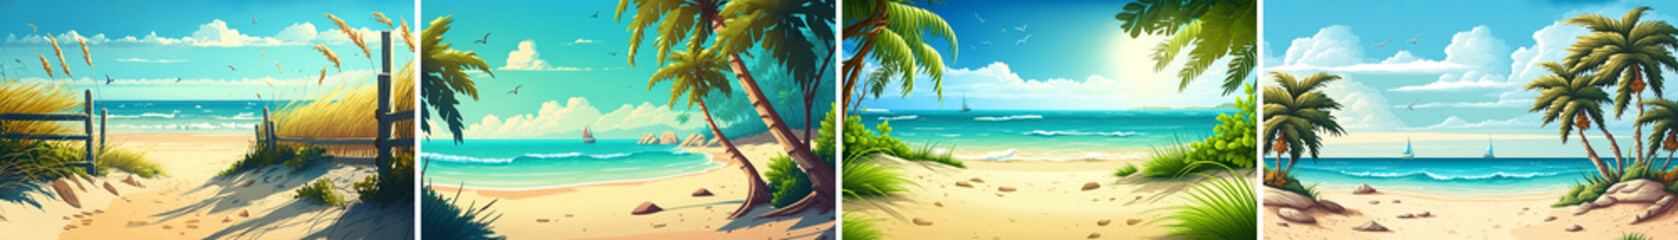 Summer beach illustration background set for content creation